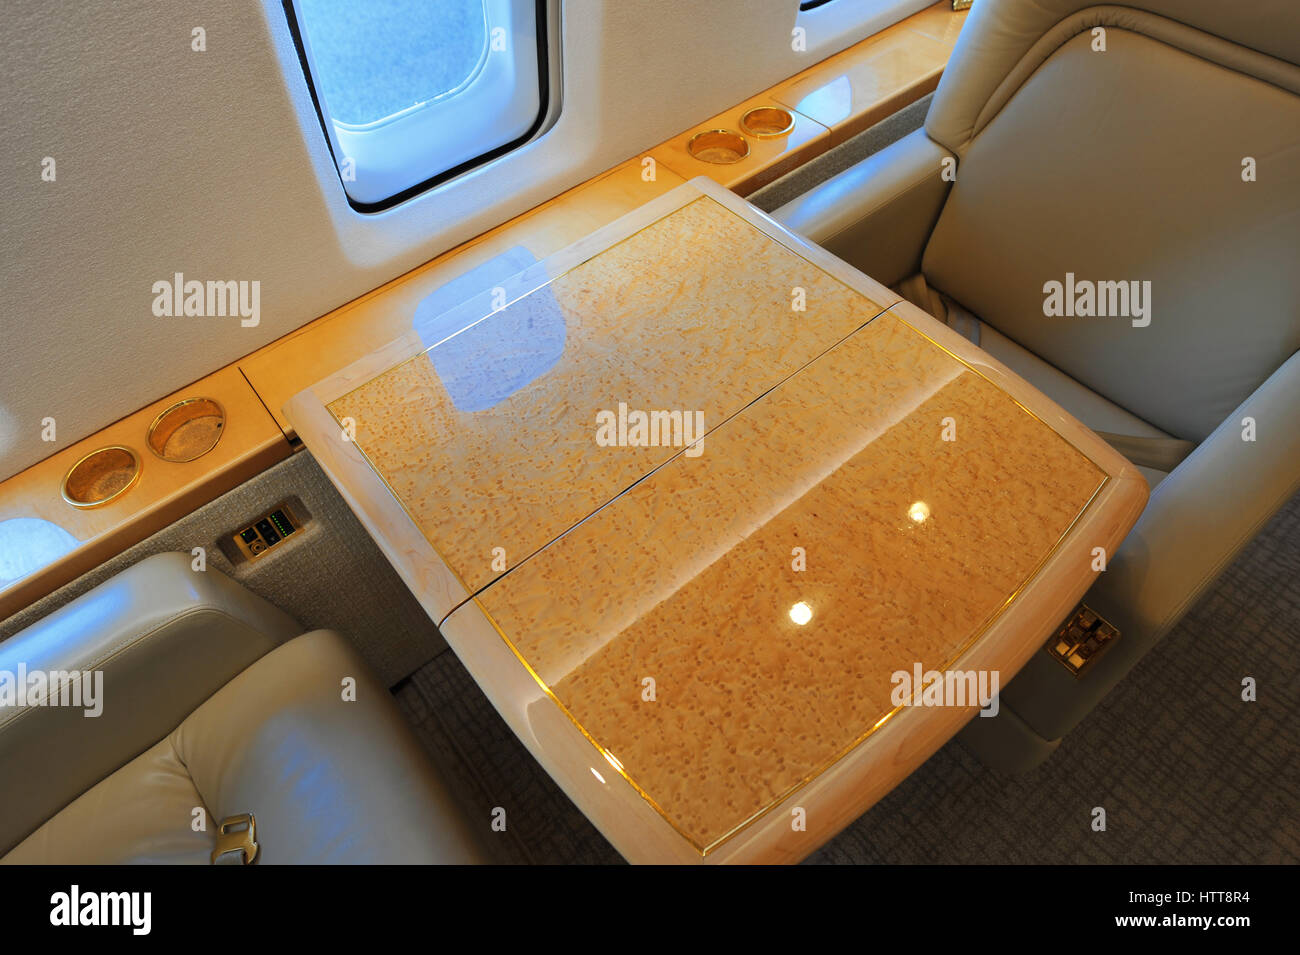 Interior shot of a Bombardier Challenger CL604, twin engine business jet Stock Photo